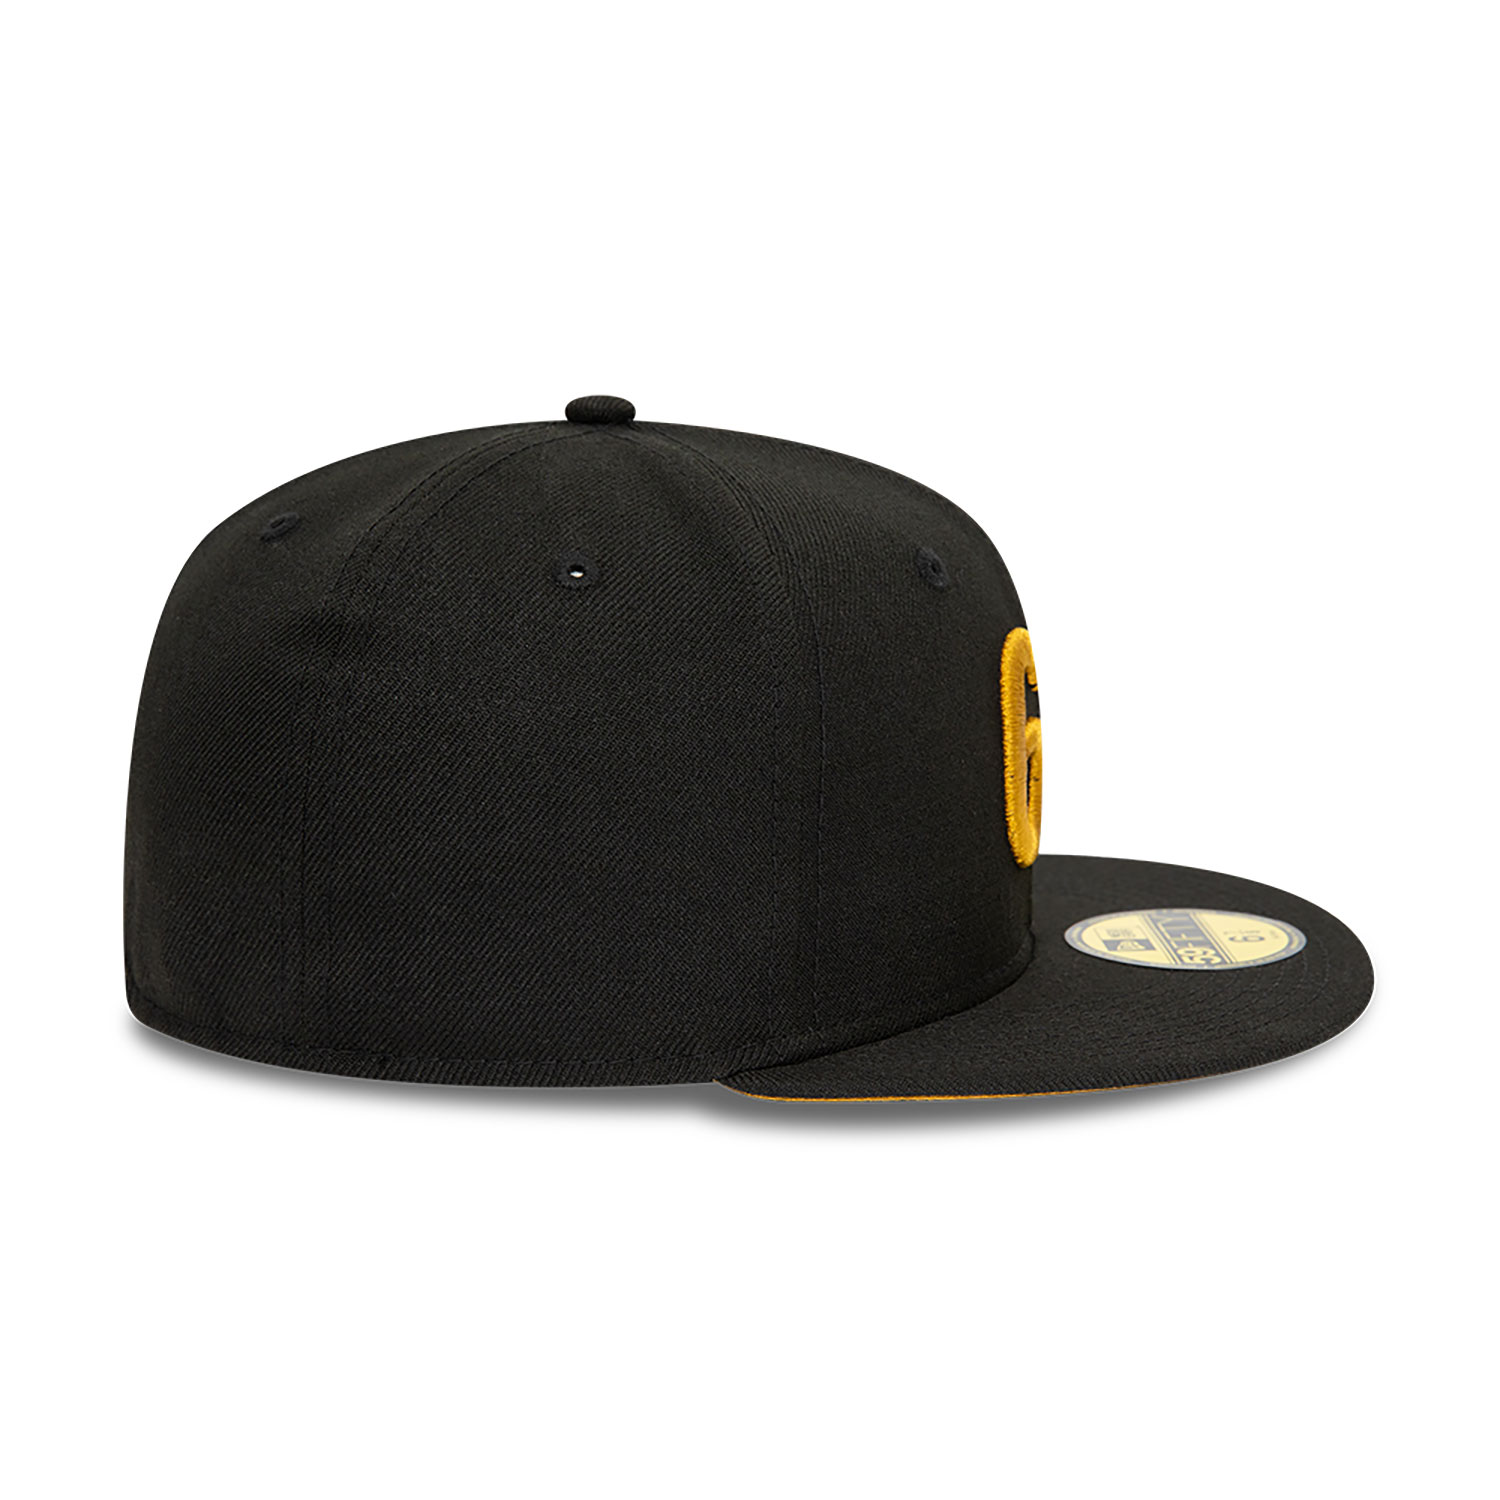 New Era 6 7/8 59FIFTY Day Black 59FIFTY Fitted Cap